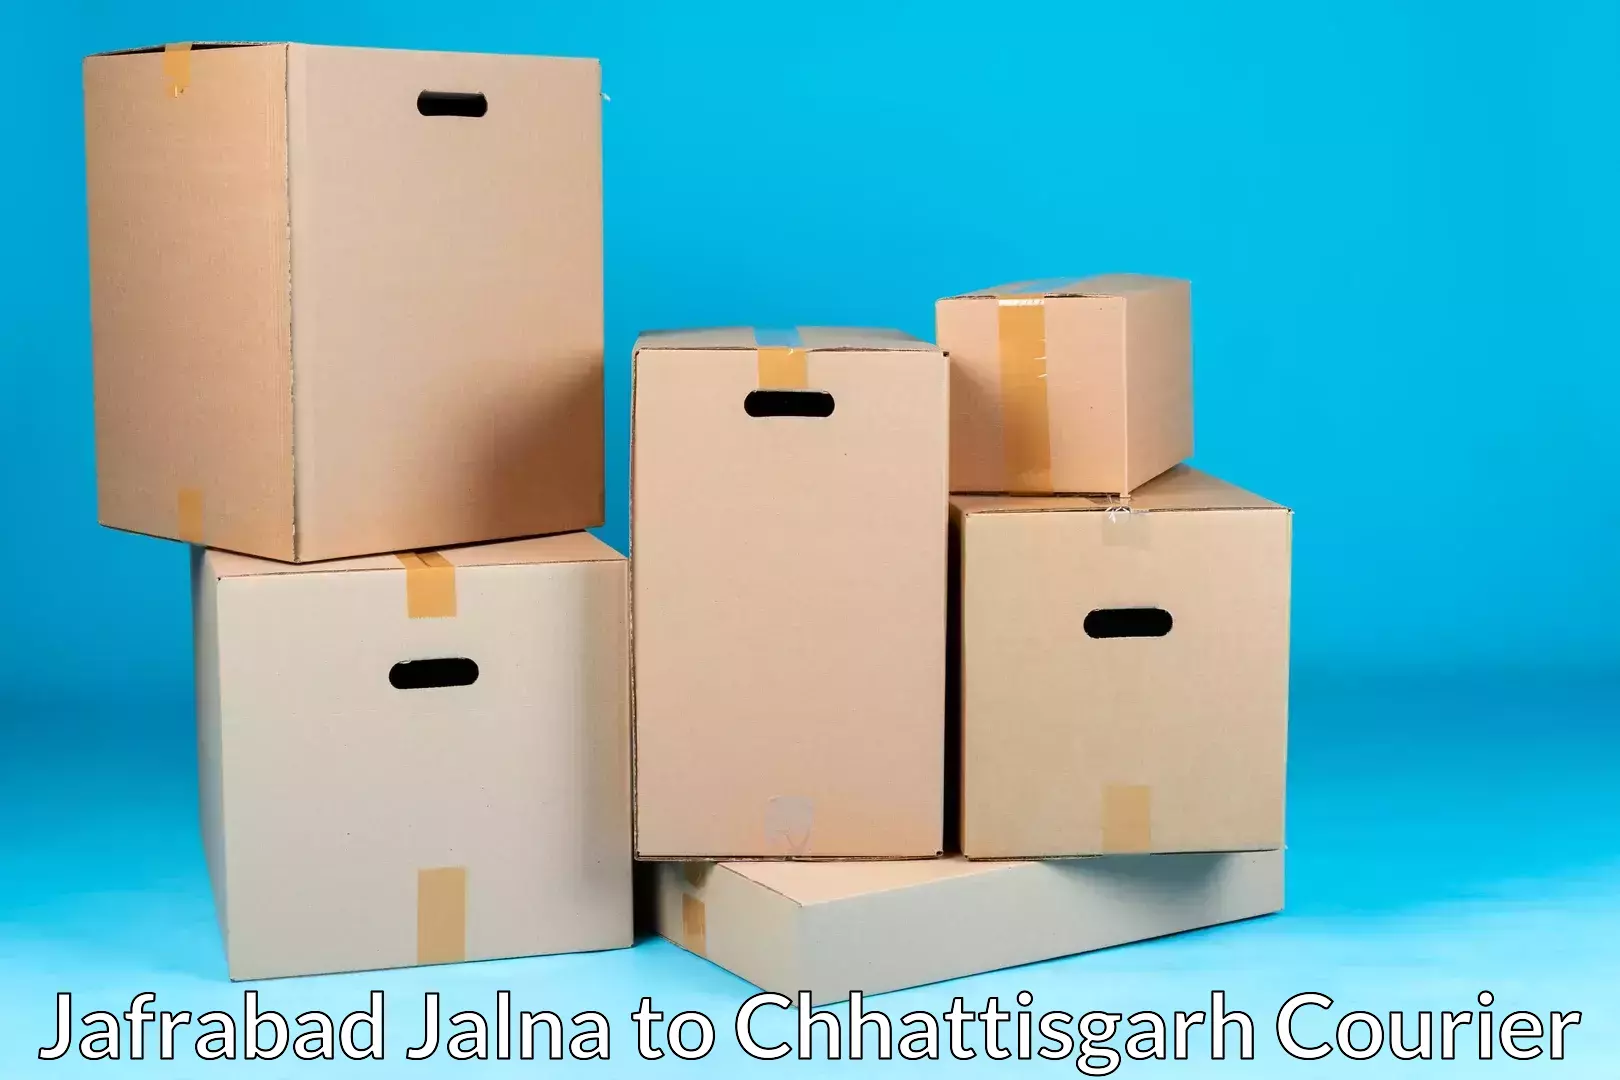 Moving and handling services Jafrabad Jalna to Chhattisgarh